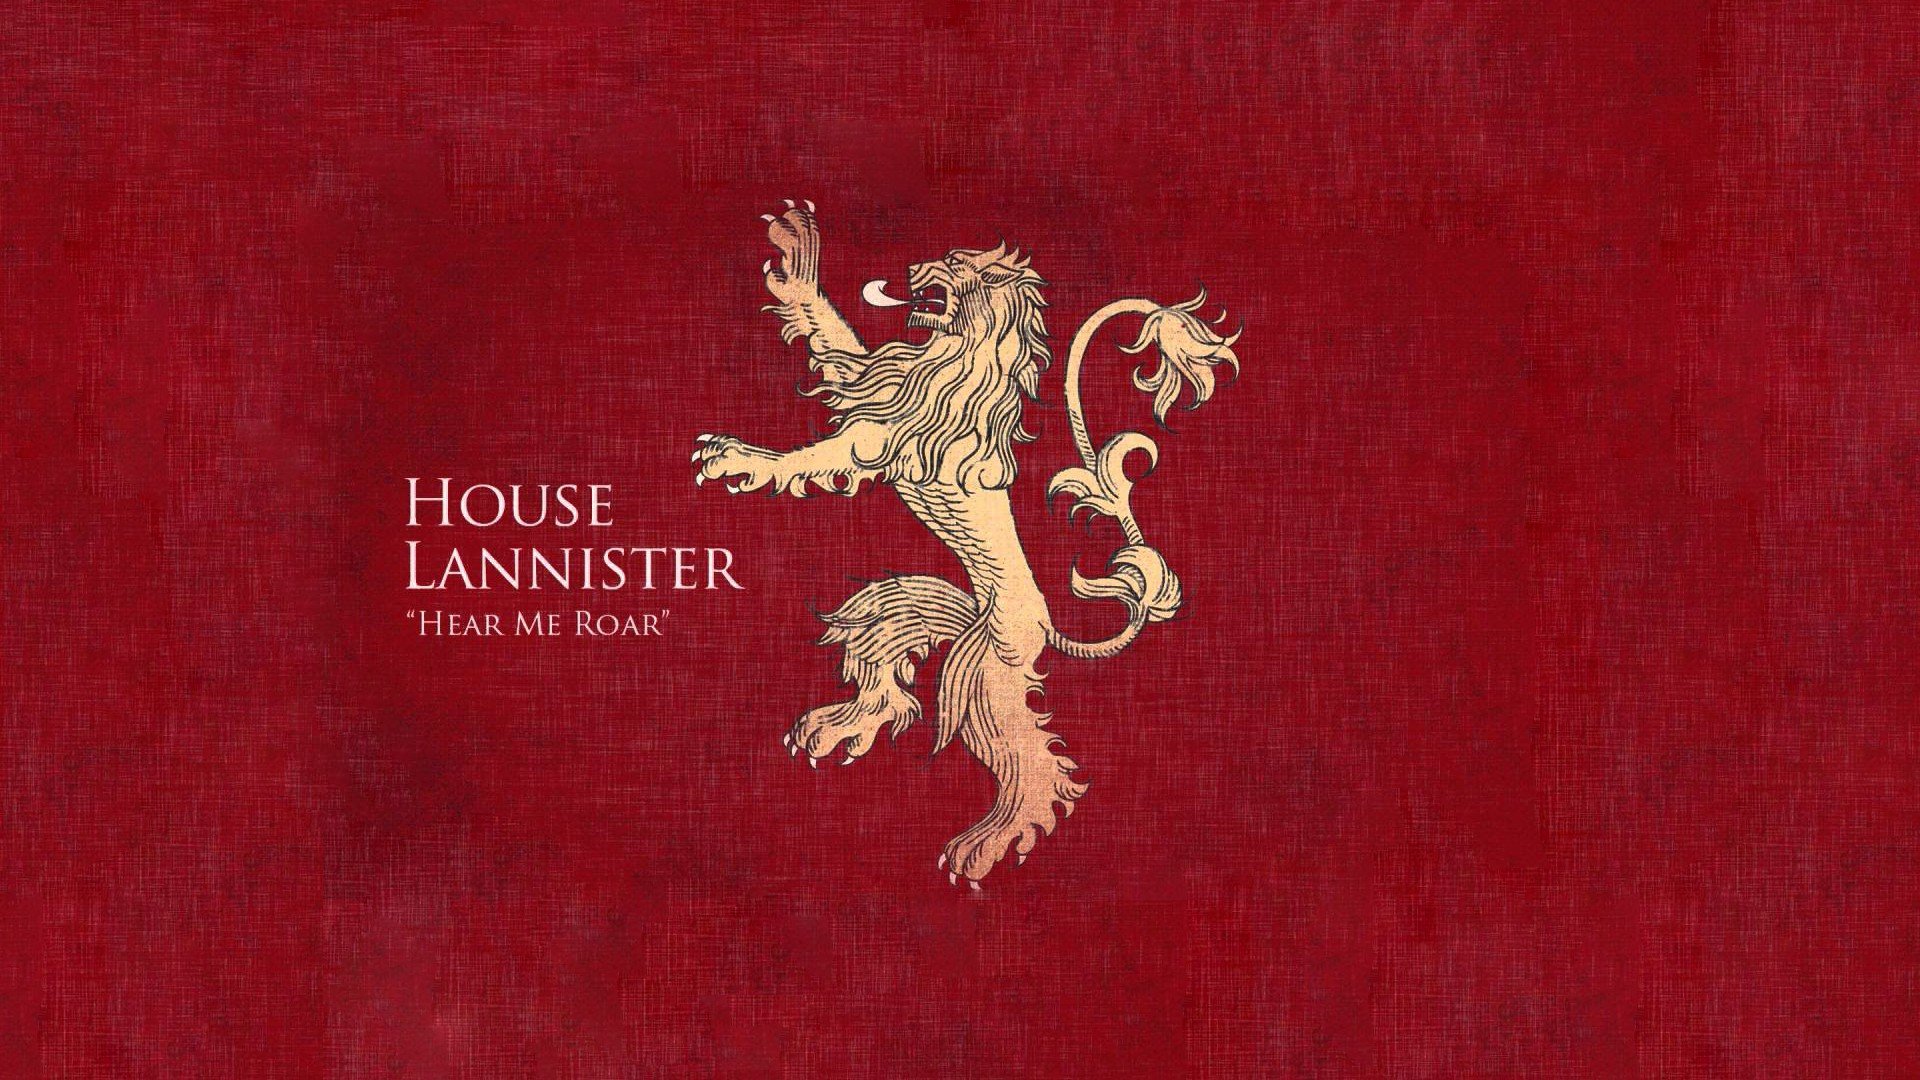 House Lannister, Game of Thrones Wallpaper